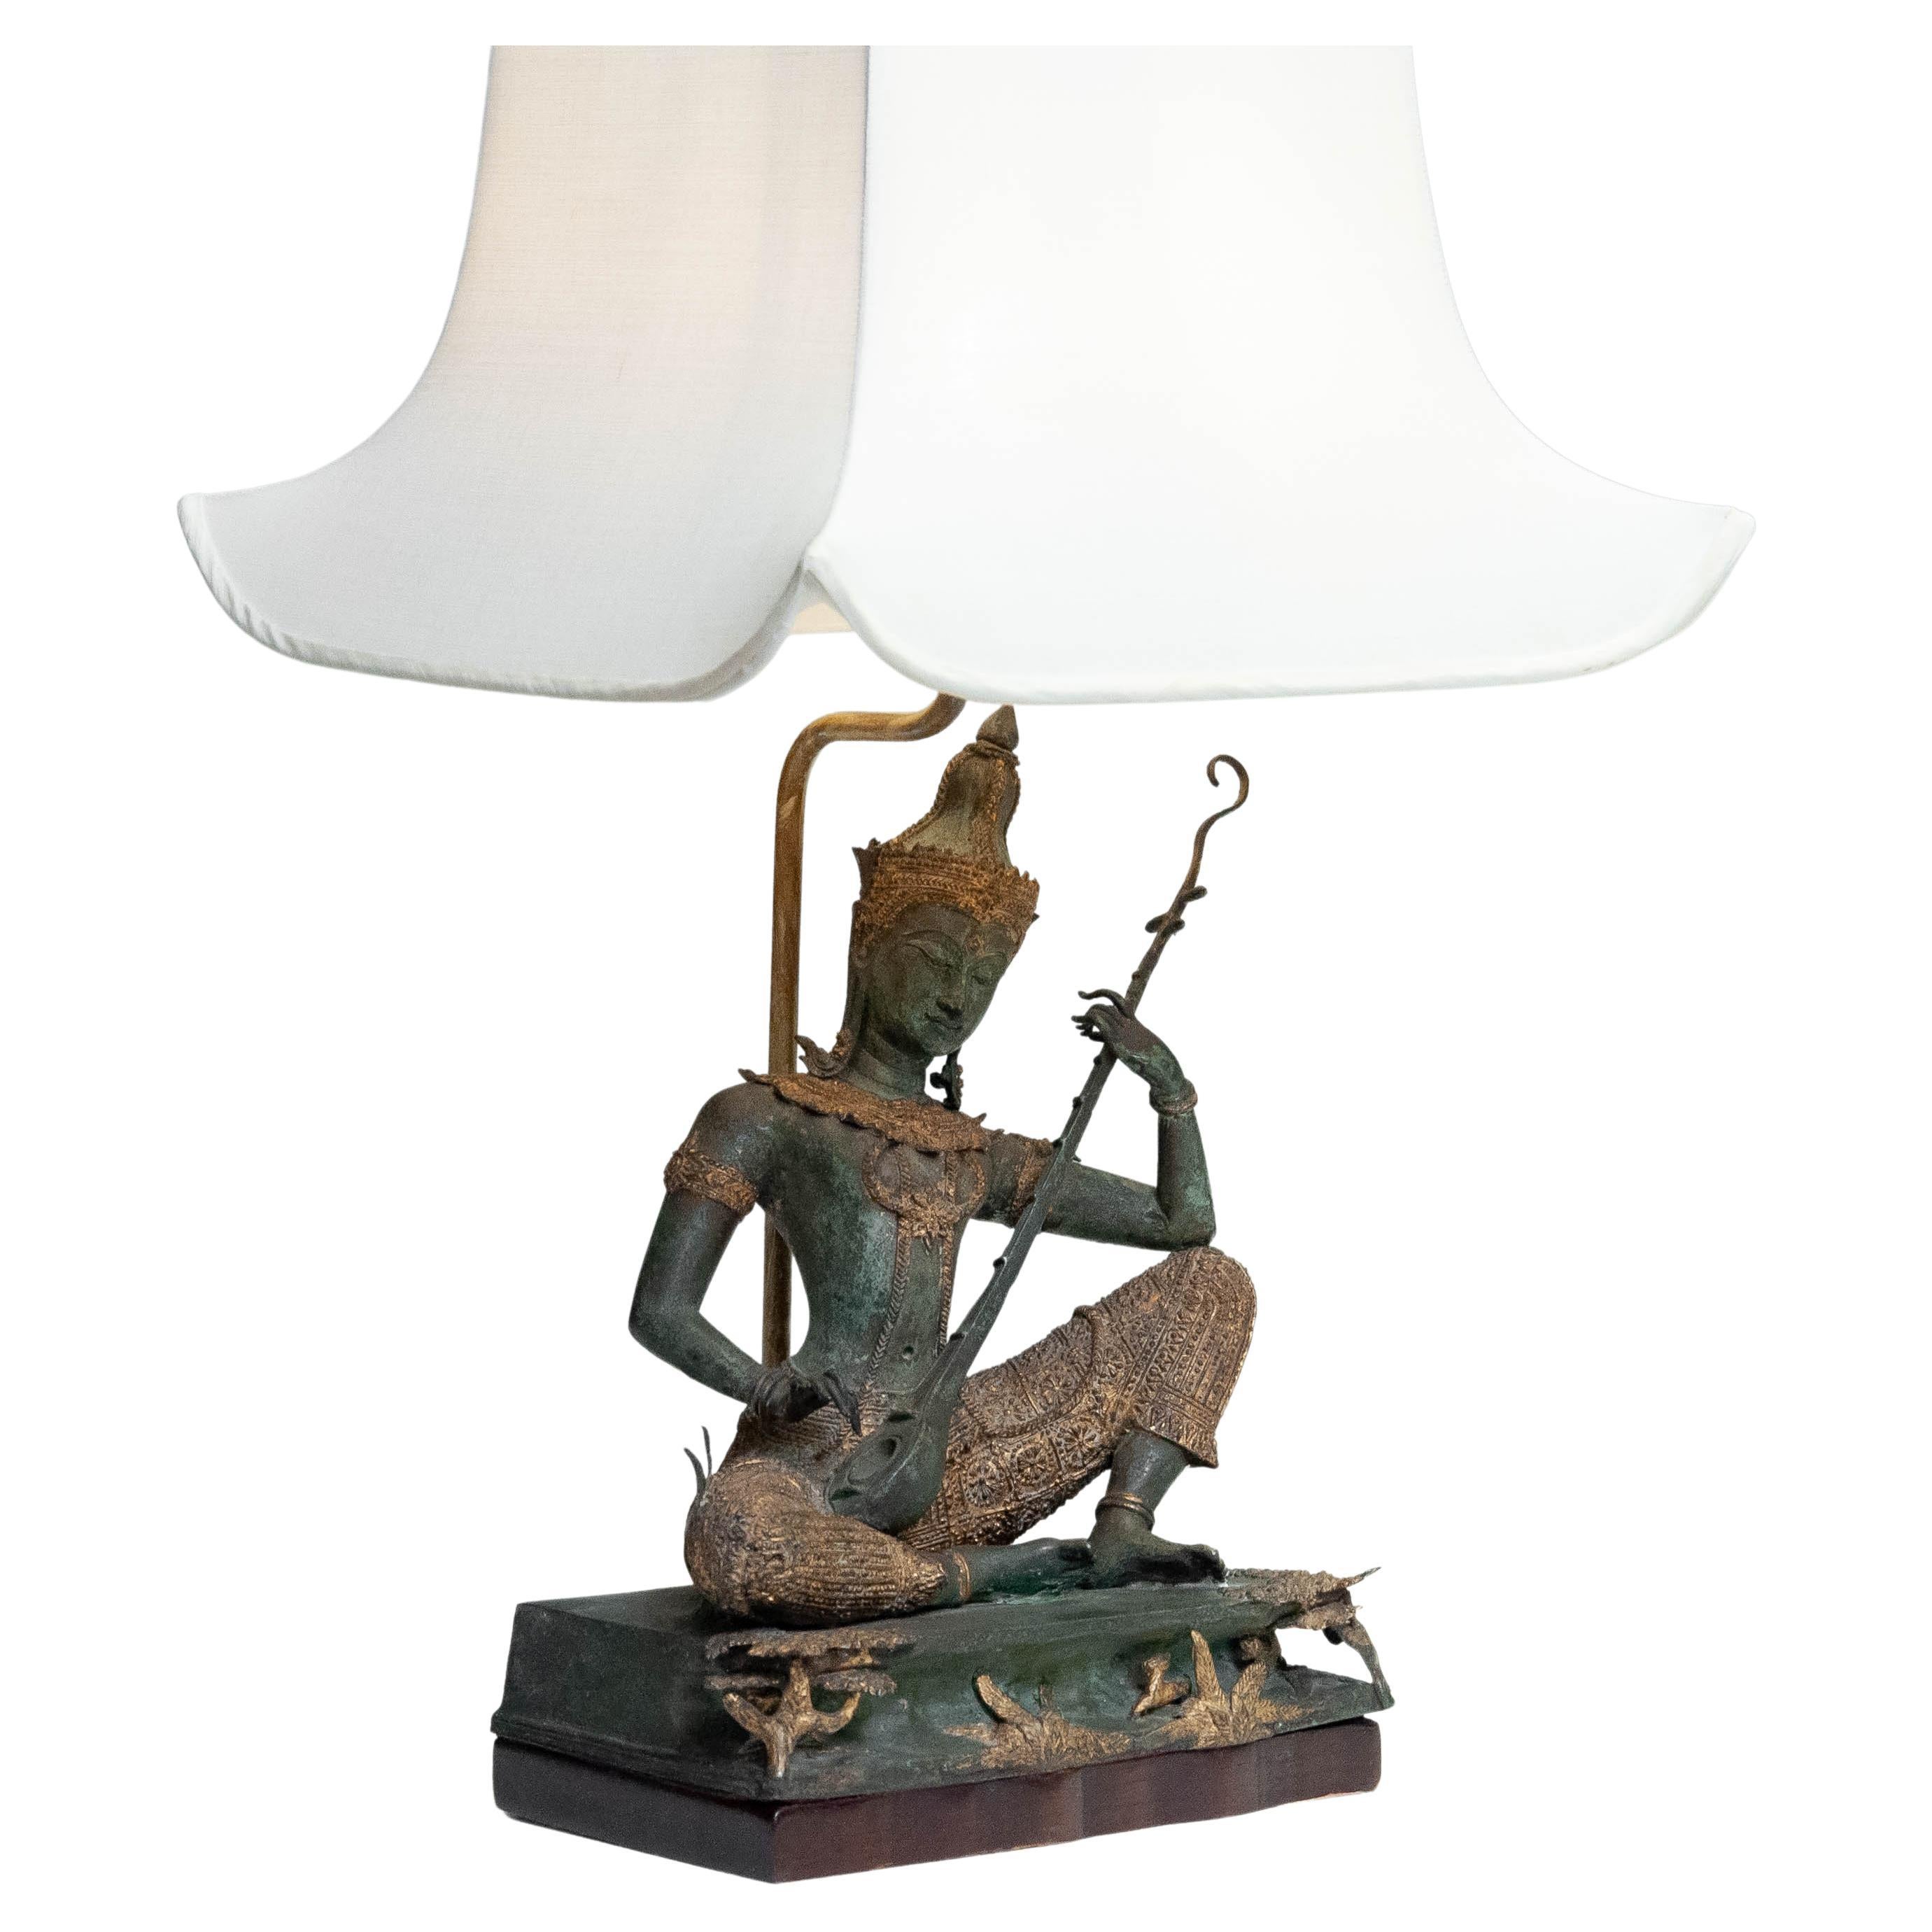 Beautiful and very decorative table lamp from Thailand with extremely detailed brass statue from Phra Aphai Mani from the 1970s. Playing the Jakhee ( three stringed guitar ).

Sitting and playing music on top of the representation of the several